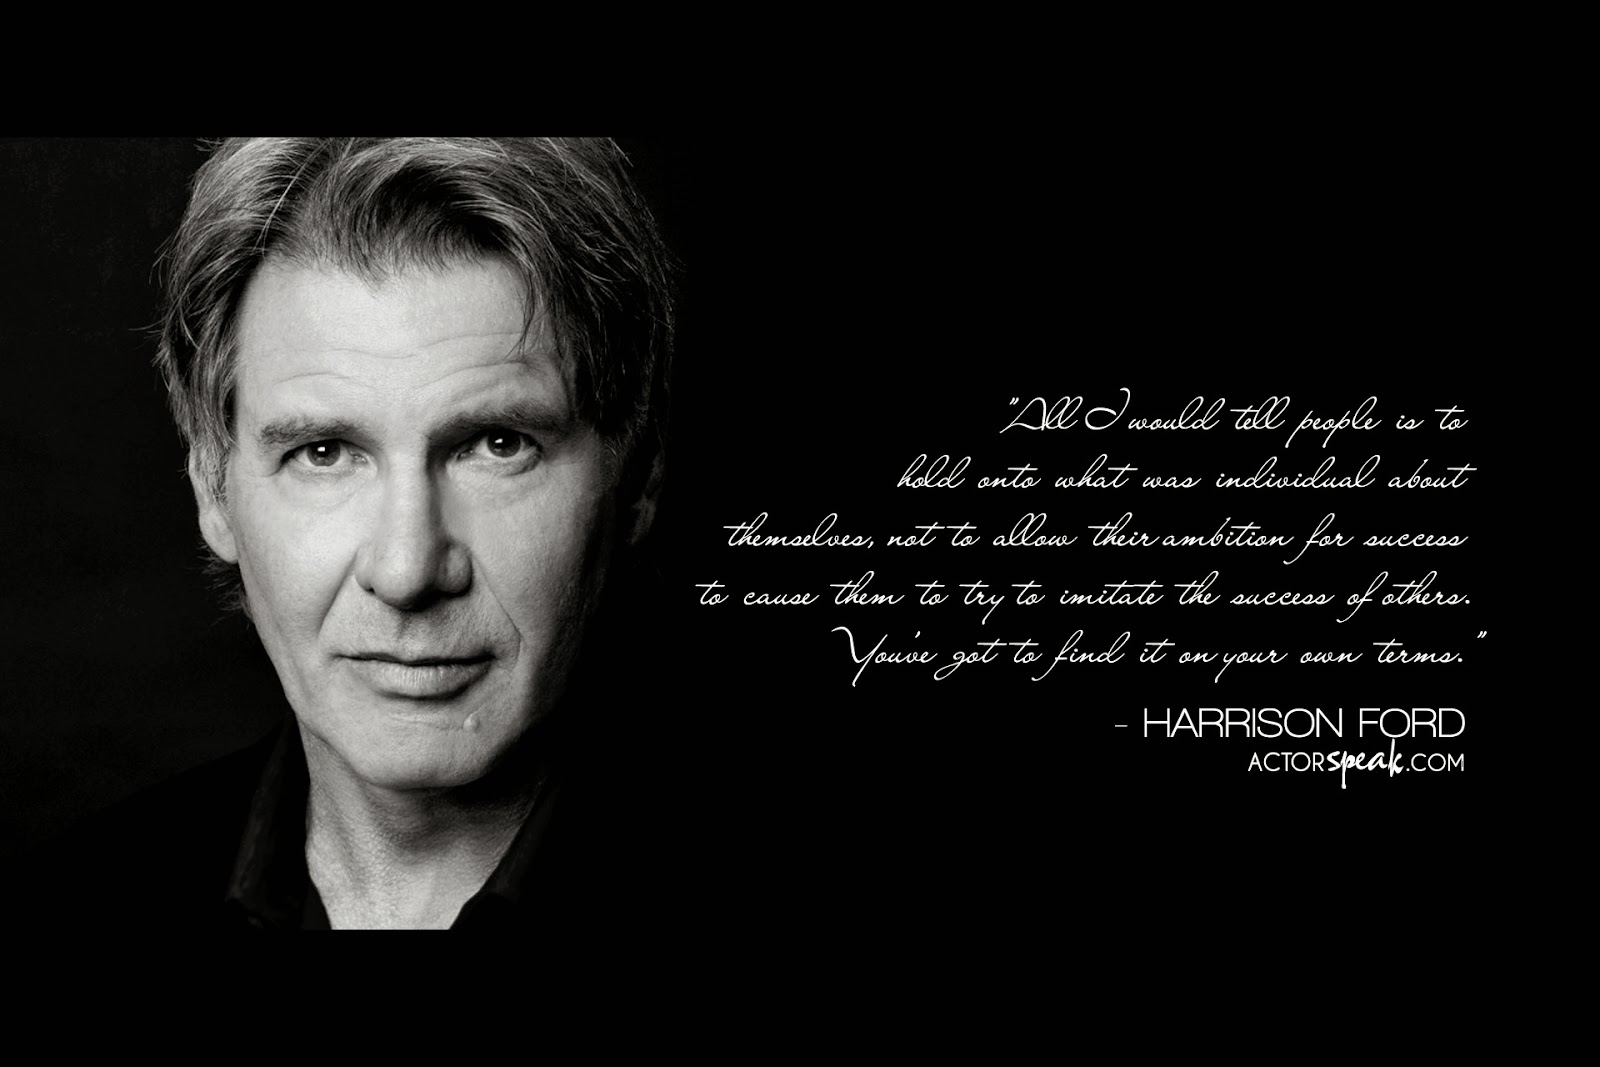 Harrison ford movie quotes star wars